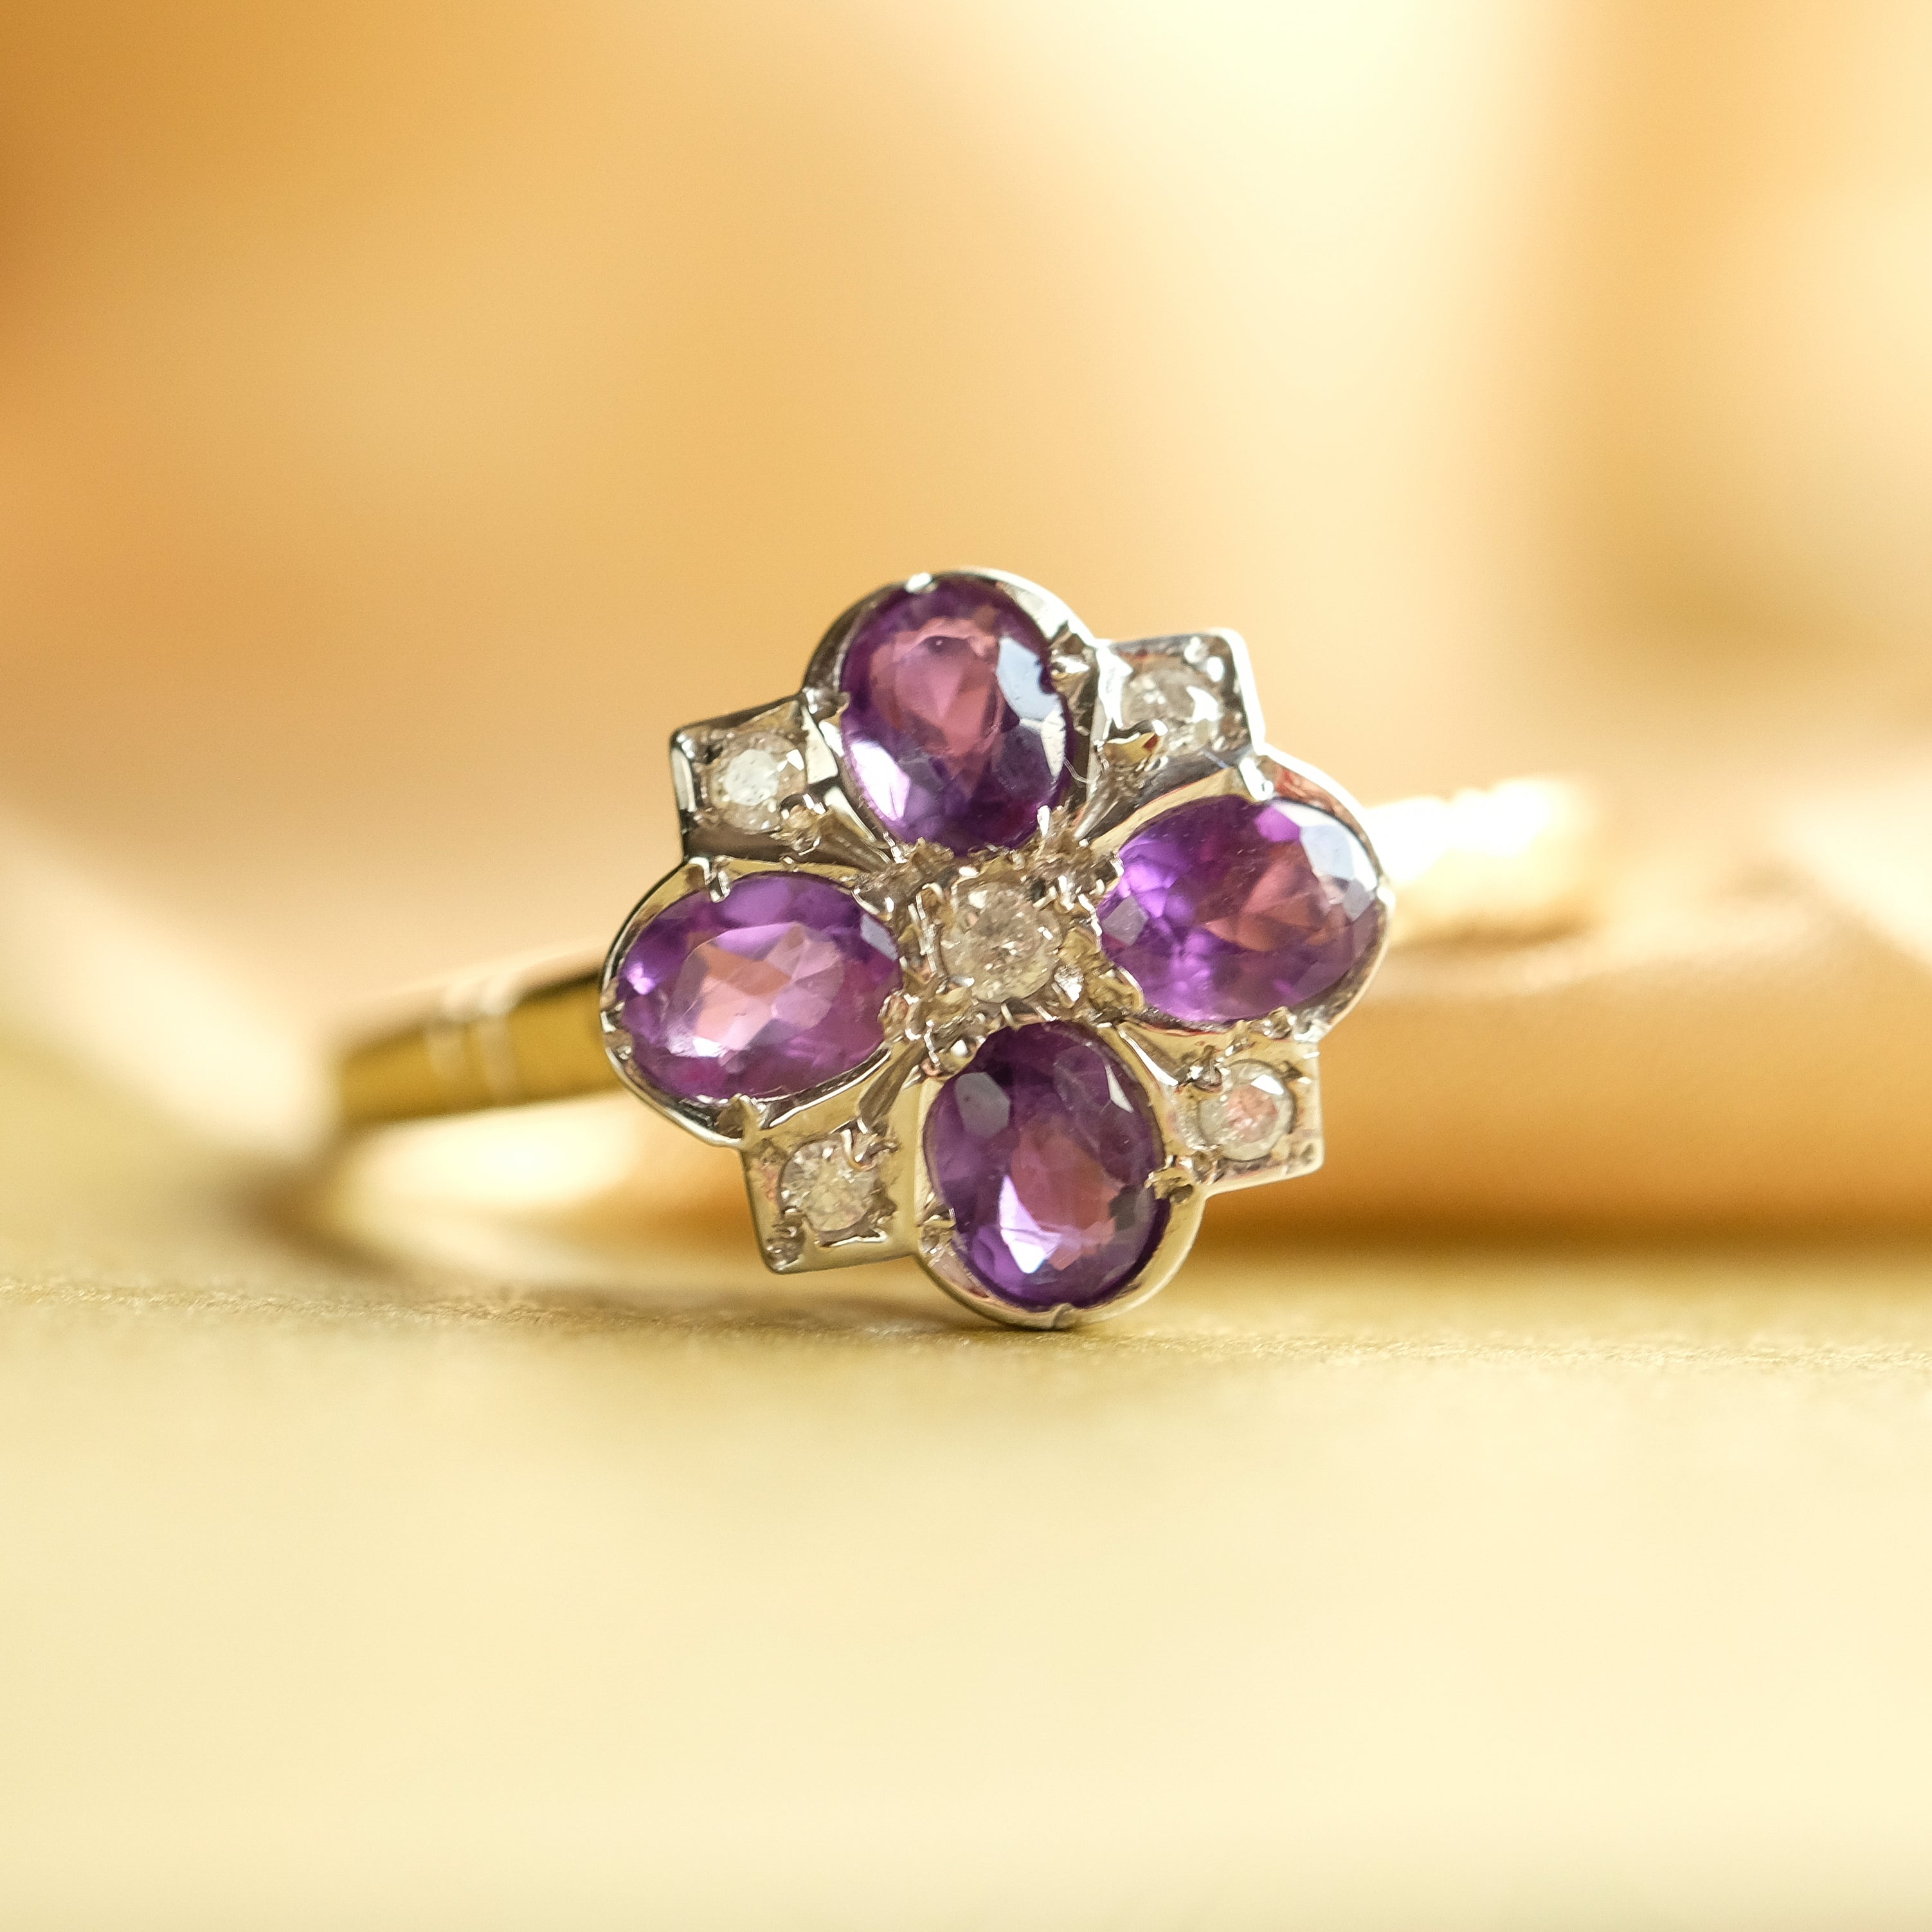 Victorian Style amethyst and diamond ring